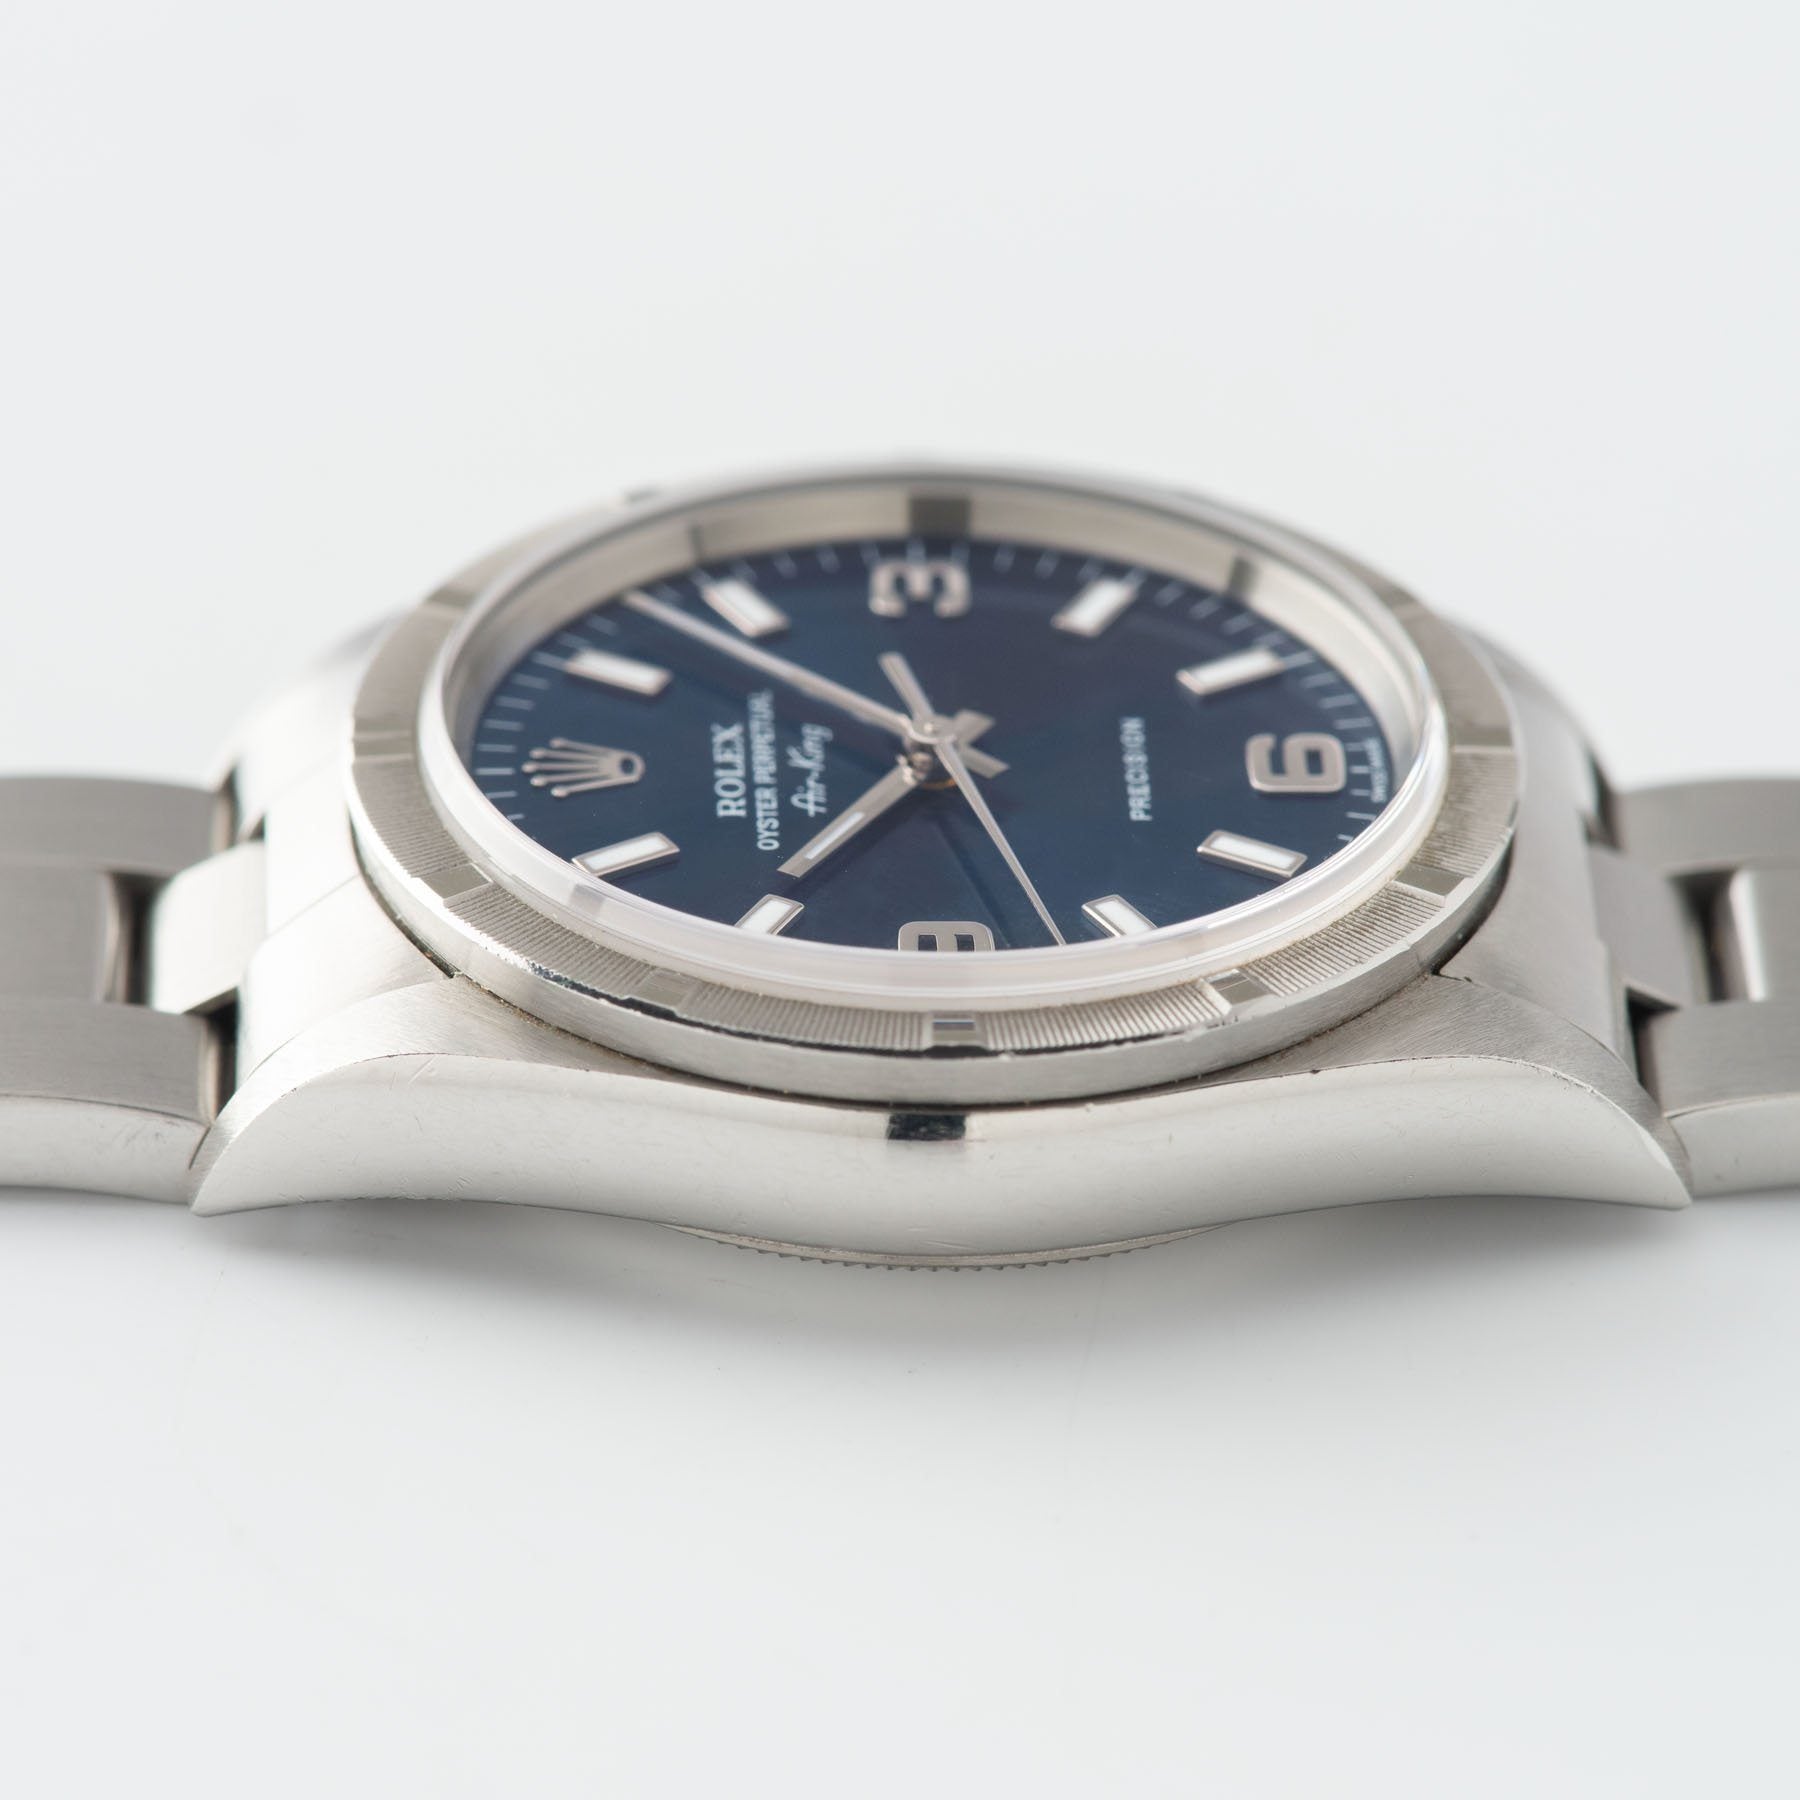 Rolex Air King Reference 14010 Blue Explorer Dial